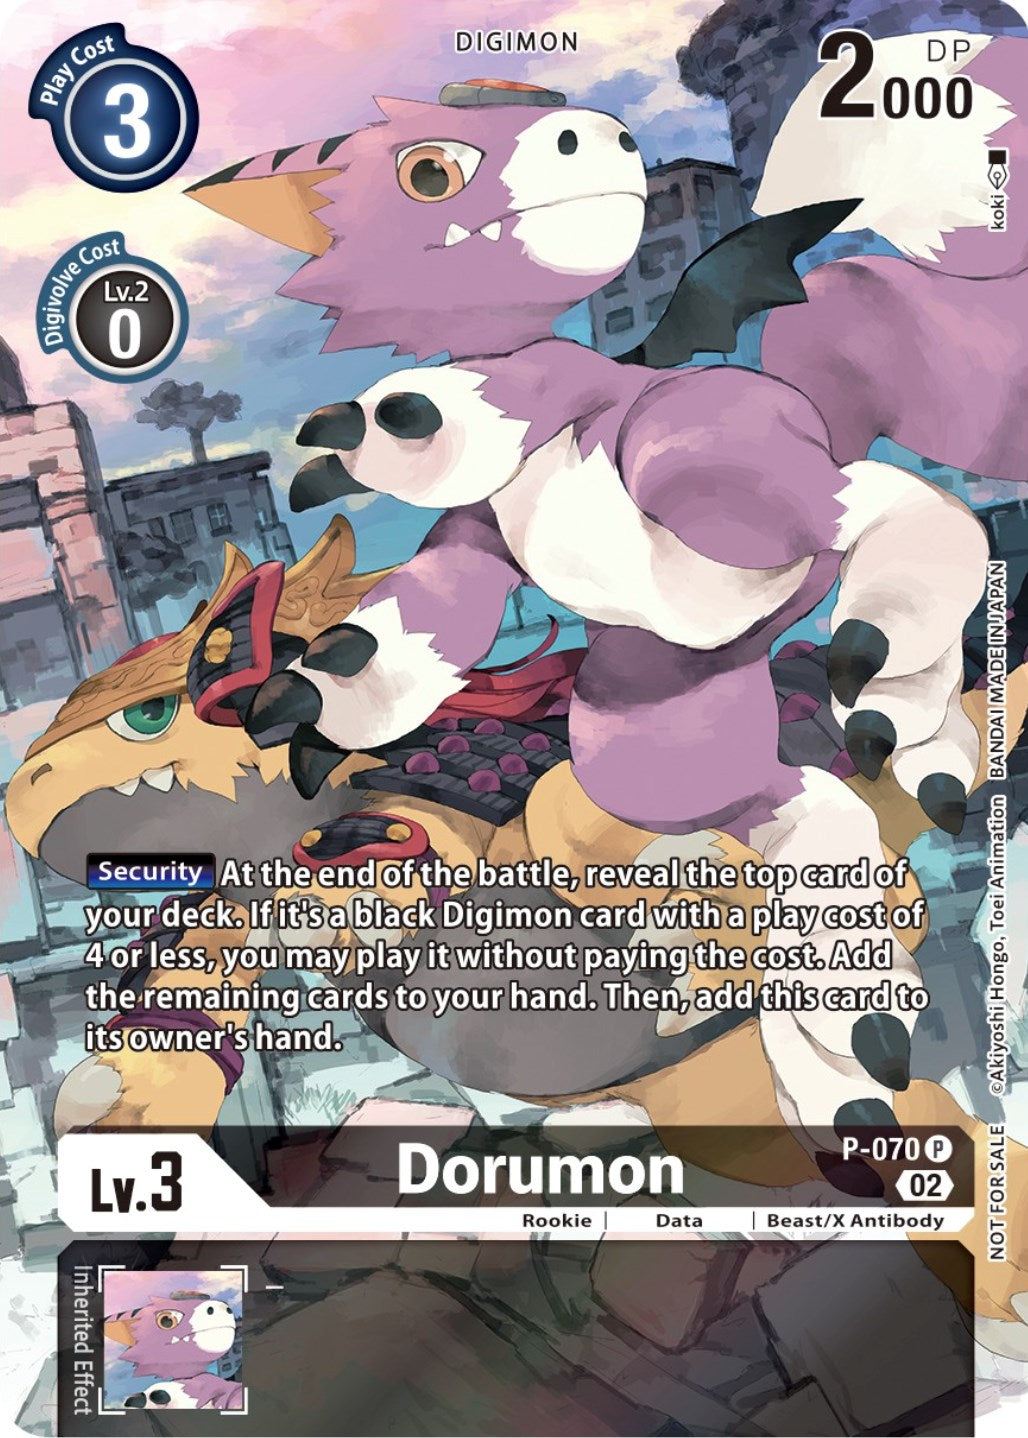 Dorumon [P-070] (Official Tournament Pack Vol. 10) [Promotional Cards] | Total Play